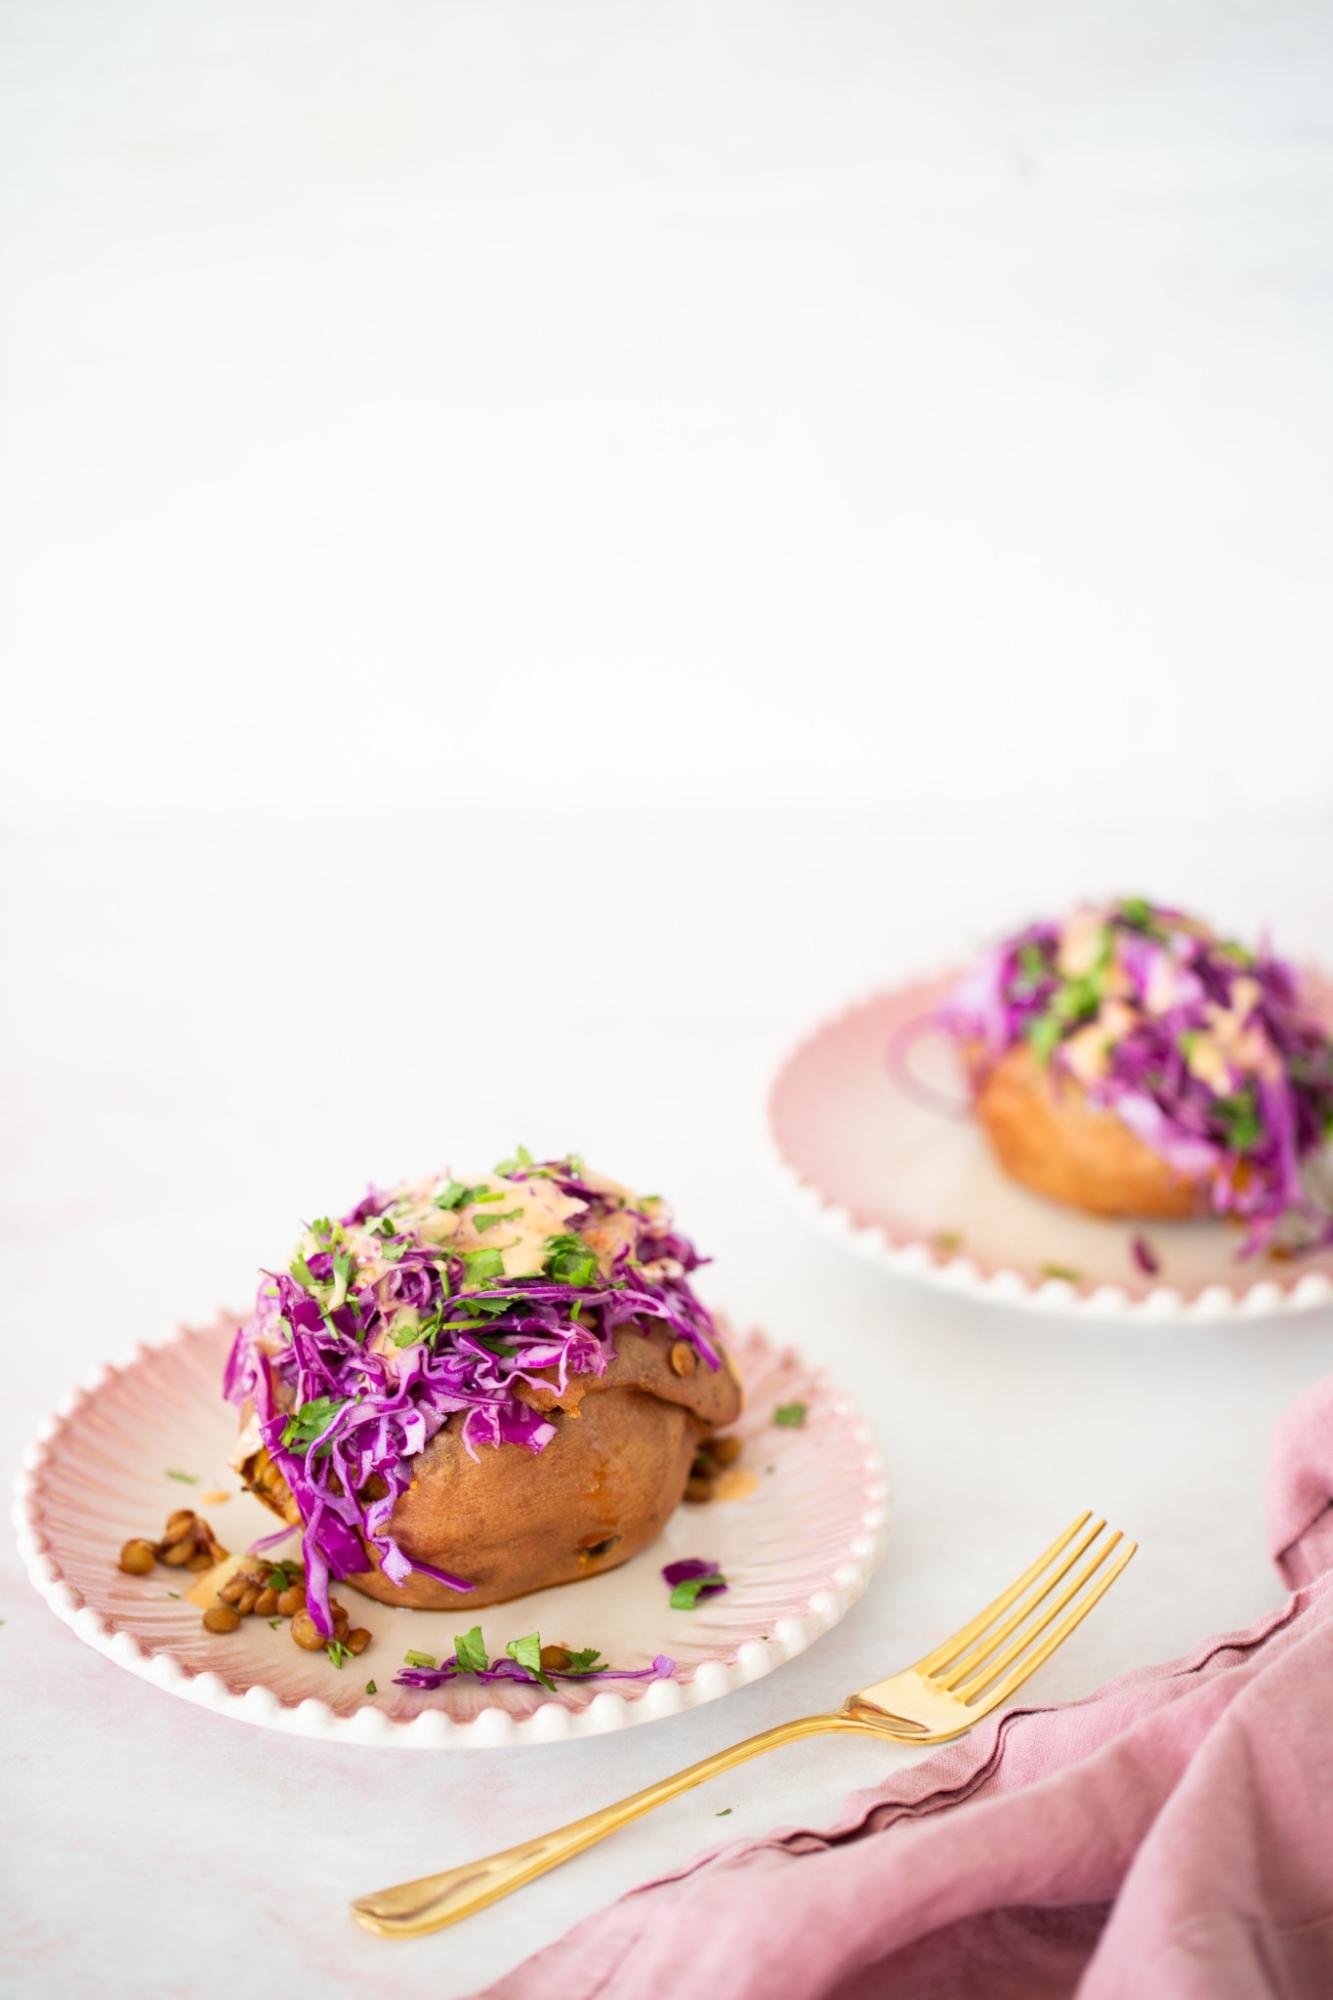 LOADED SWEET POTATOES WITH BBQ LENTILS AND SPICY SLAW